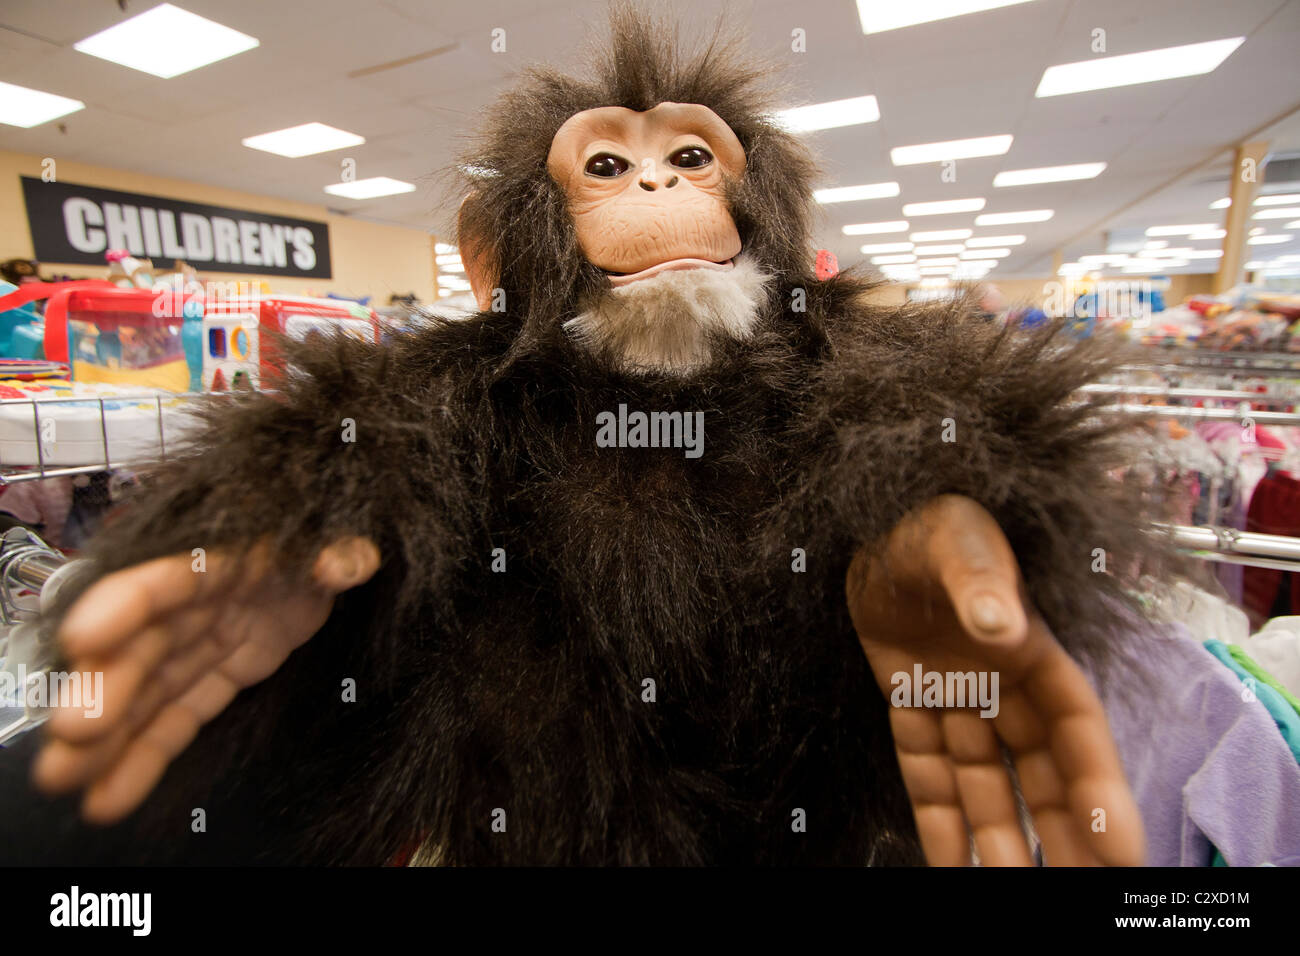 A creepy looking toy monkey at a thrift store. Stock Photo